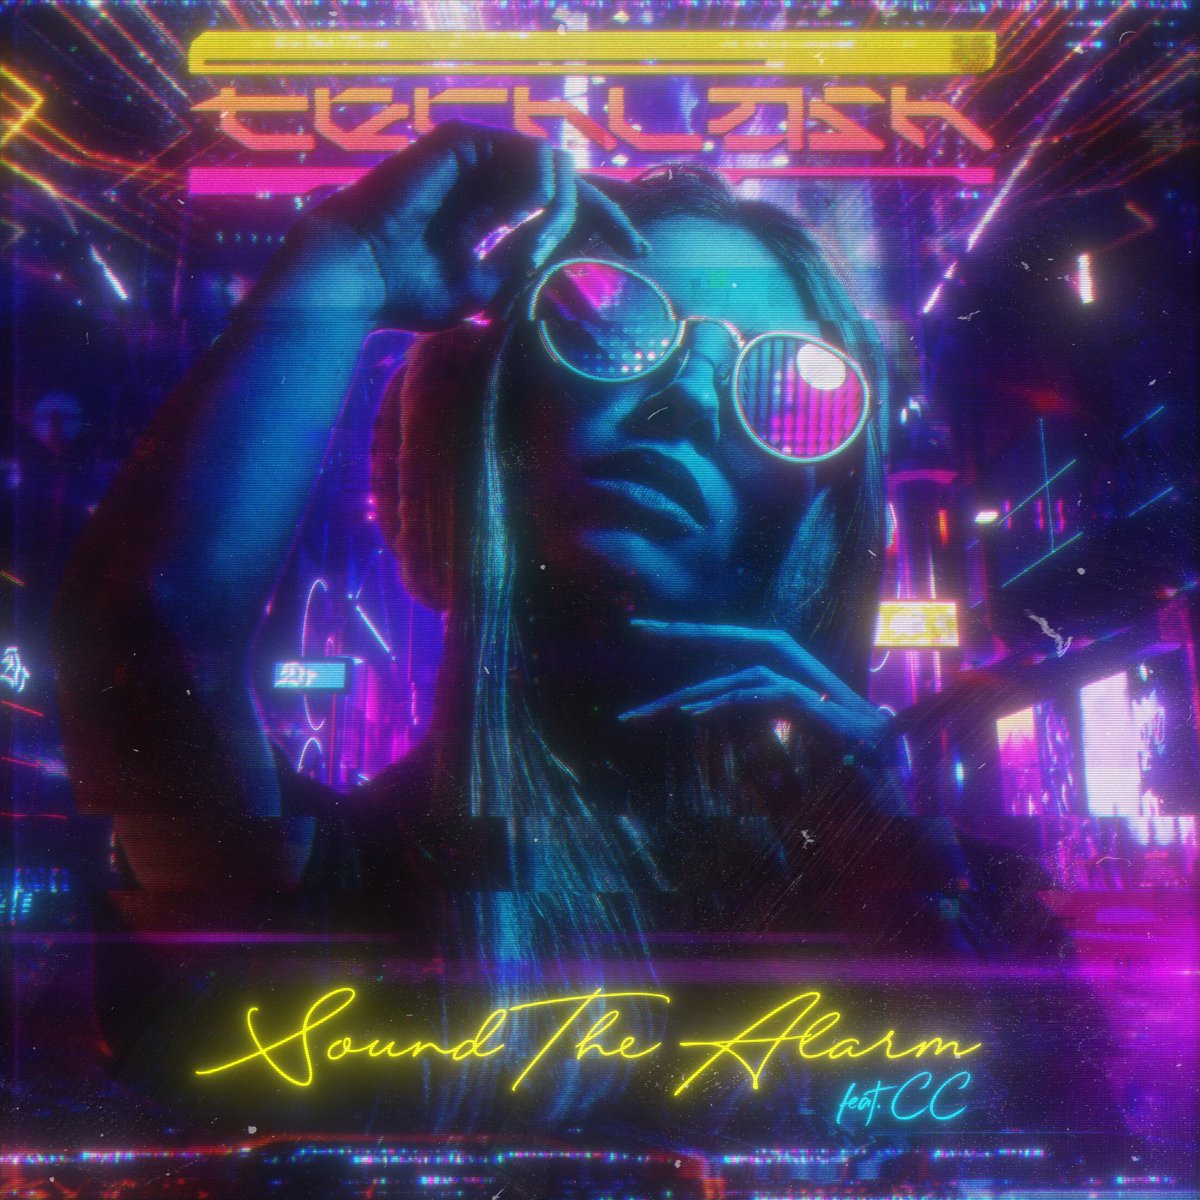 New music alert! Introducing cyberpunk act @techlash_music on Brutal Resonance Records. New digital single 'Sound the Alarm (feat. CC)' available now in both digital and vinyl postcard formats. brutalresonance.bandcamp.com/album/sound-th…